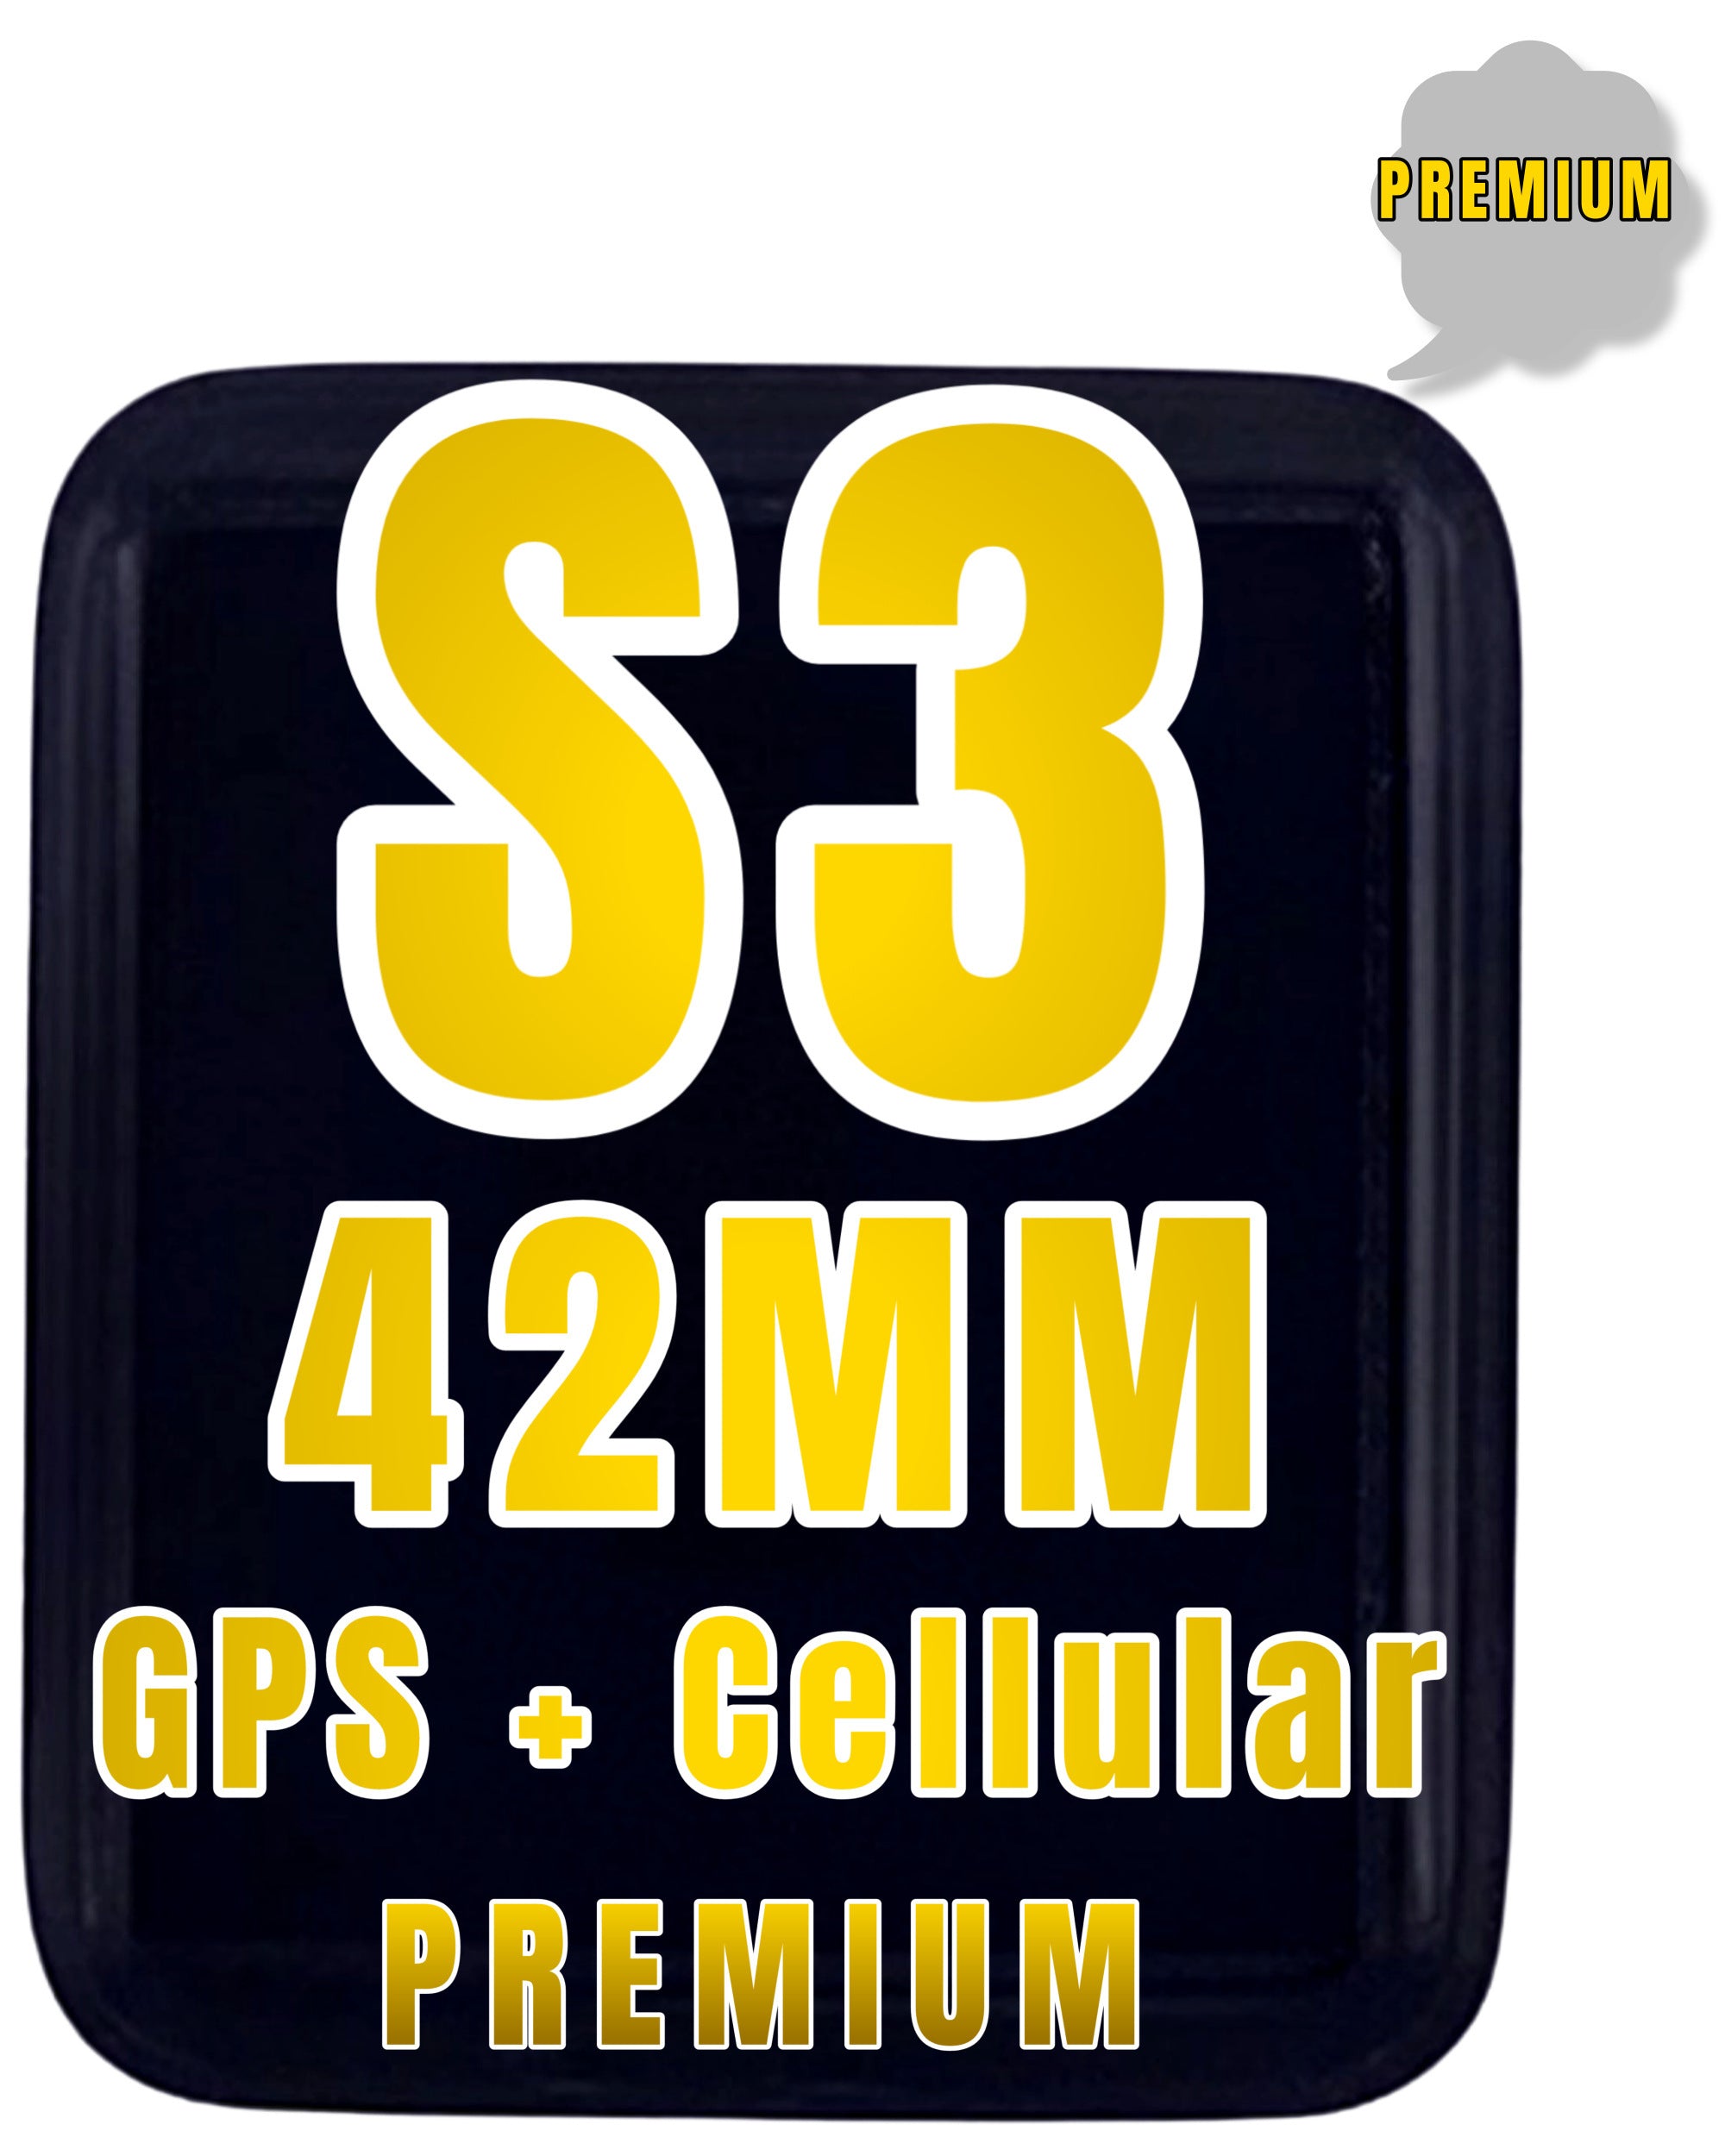 For Watch Series 3 (42MM) OLED Screen Replacement (GPS + Cellular Version) (Premium)